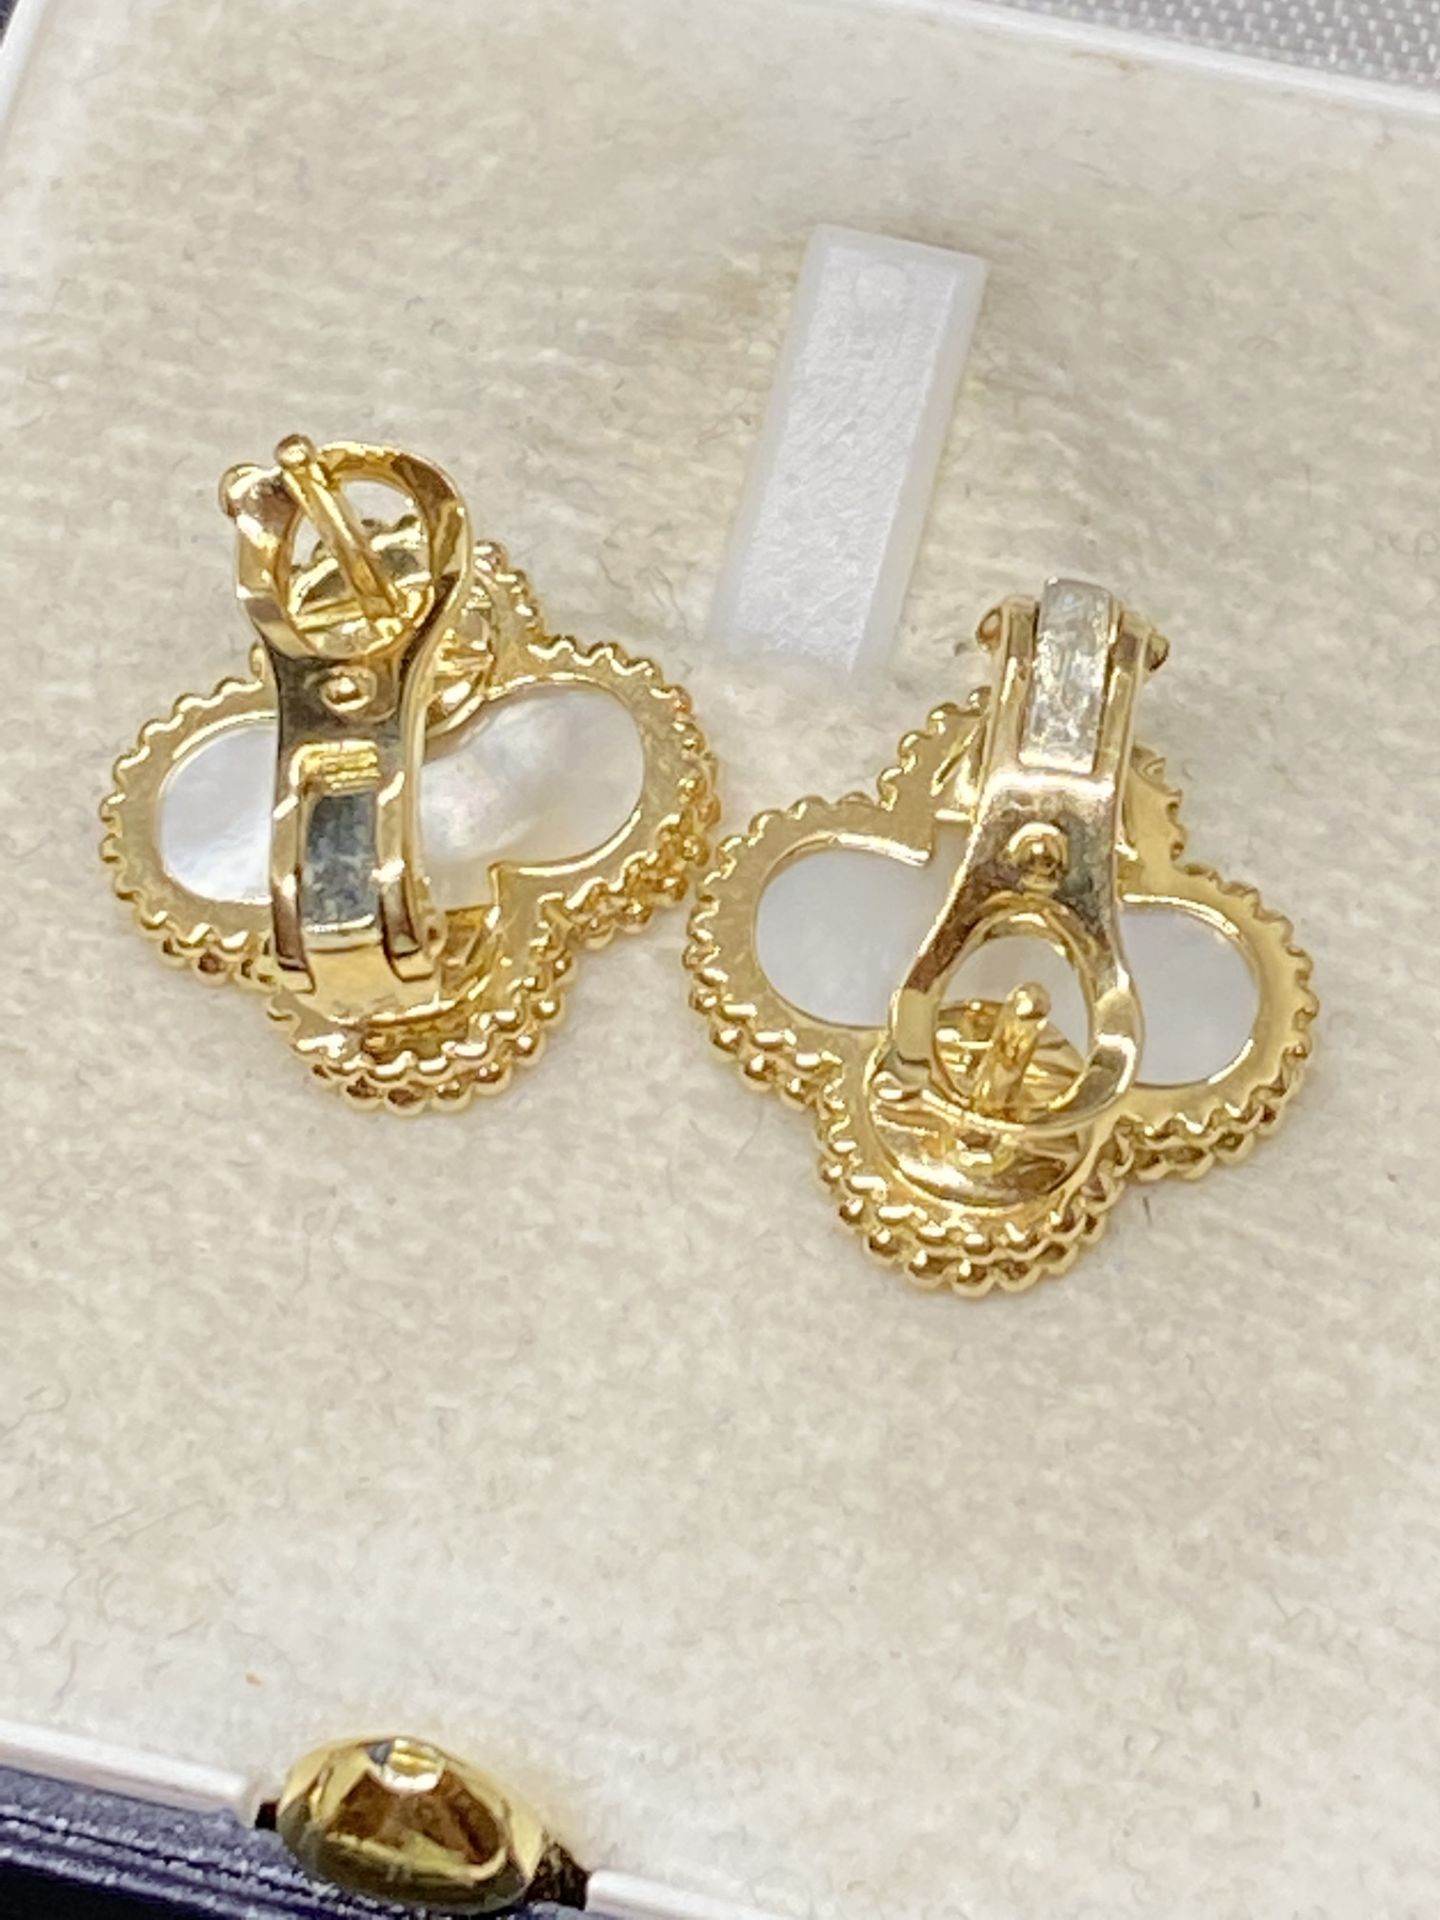 18ct YELLOW GOLD MOTHER OF PEARL EARRINGS- MARKED VCA - Image 3 of 4